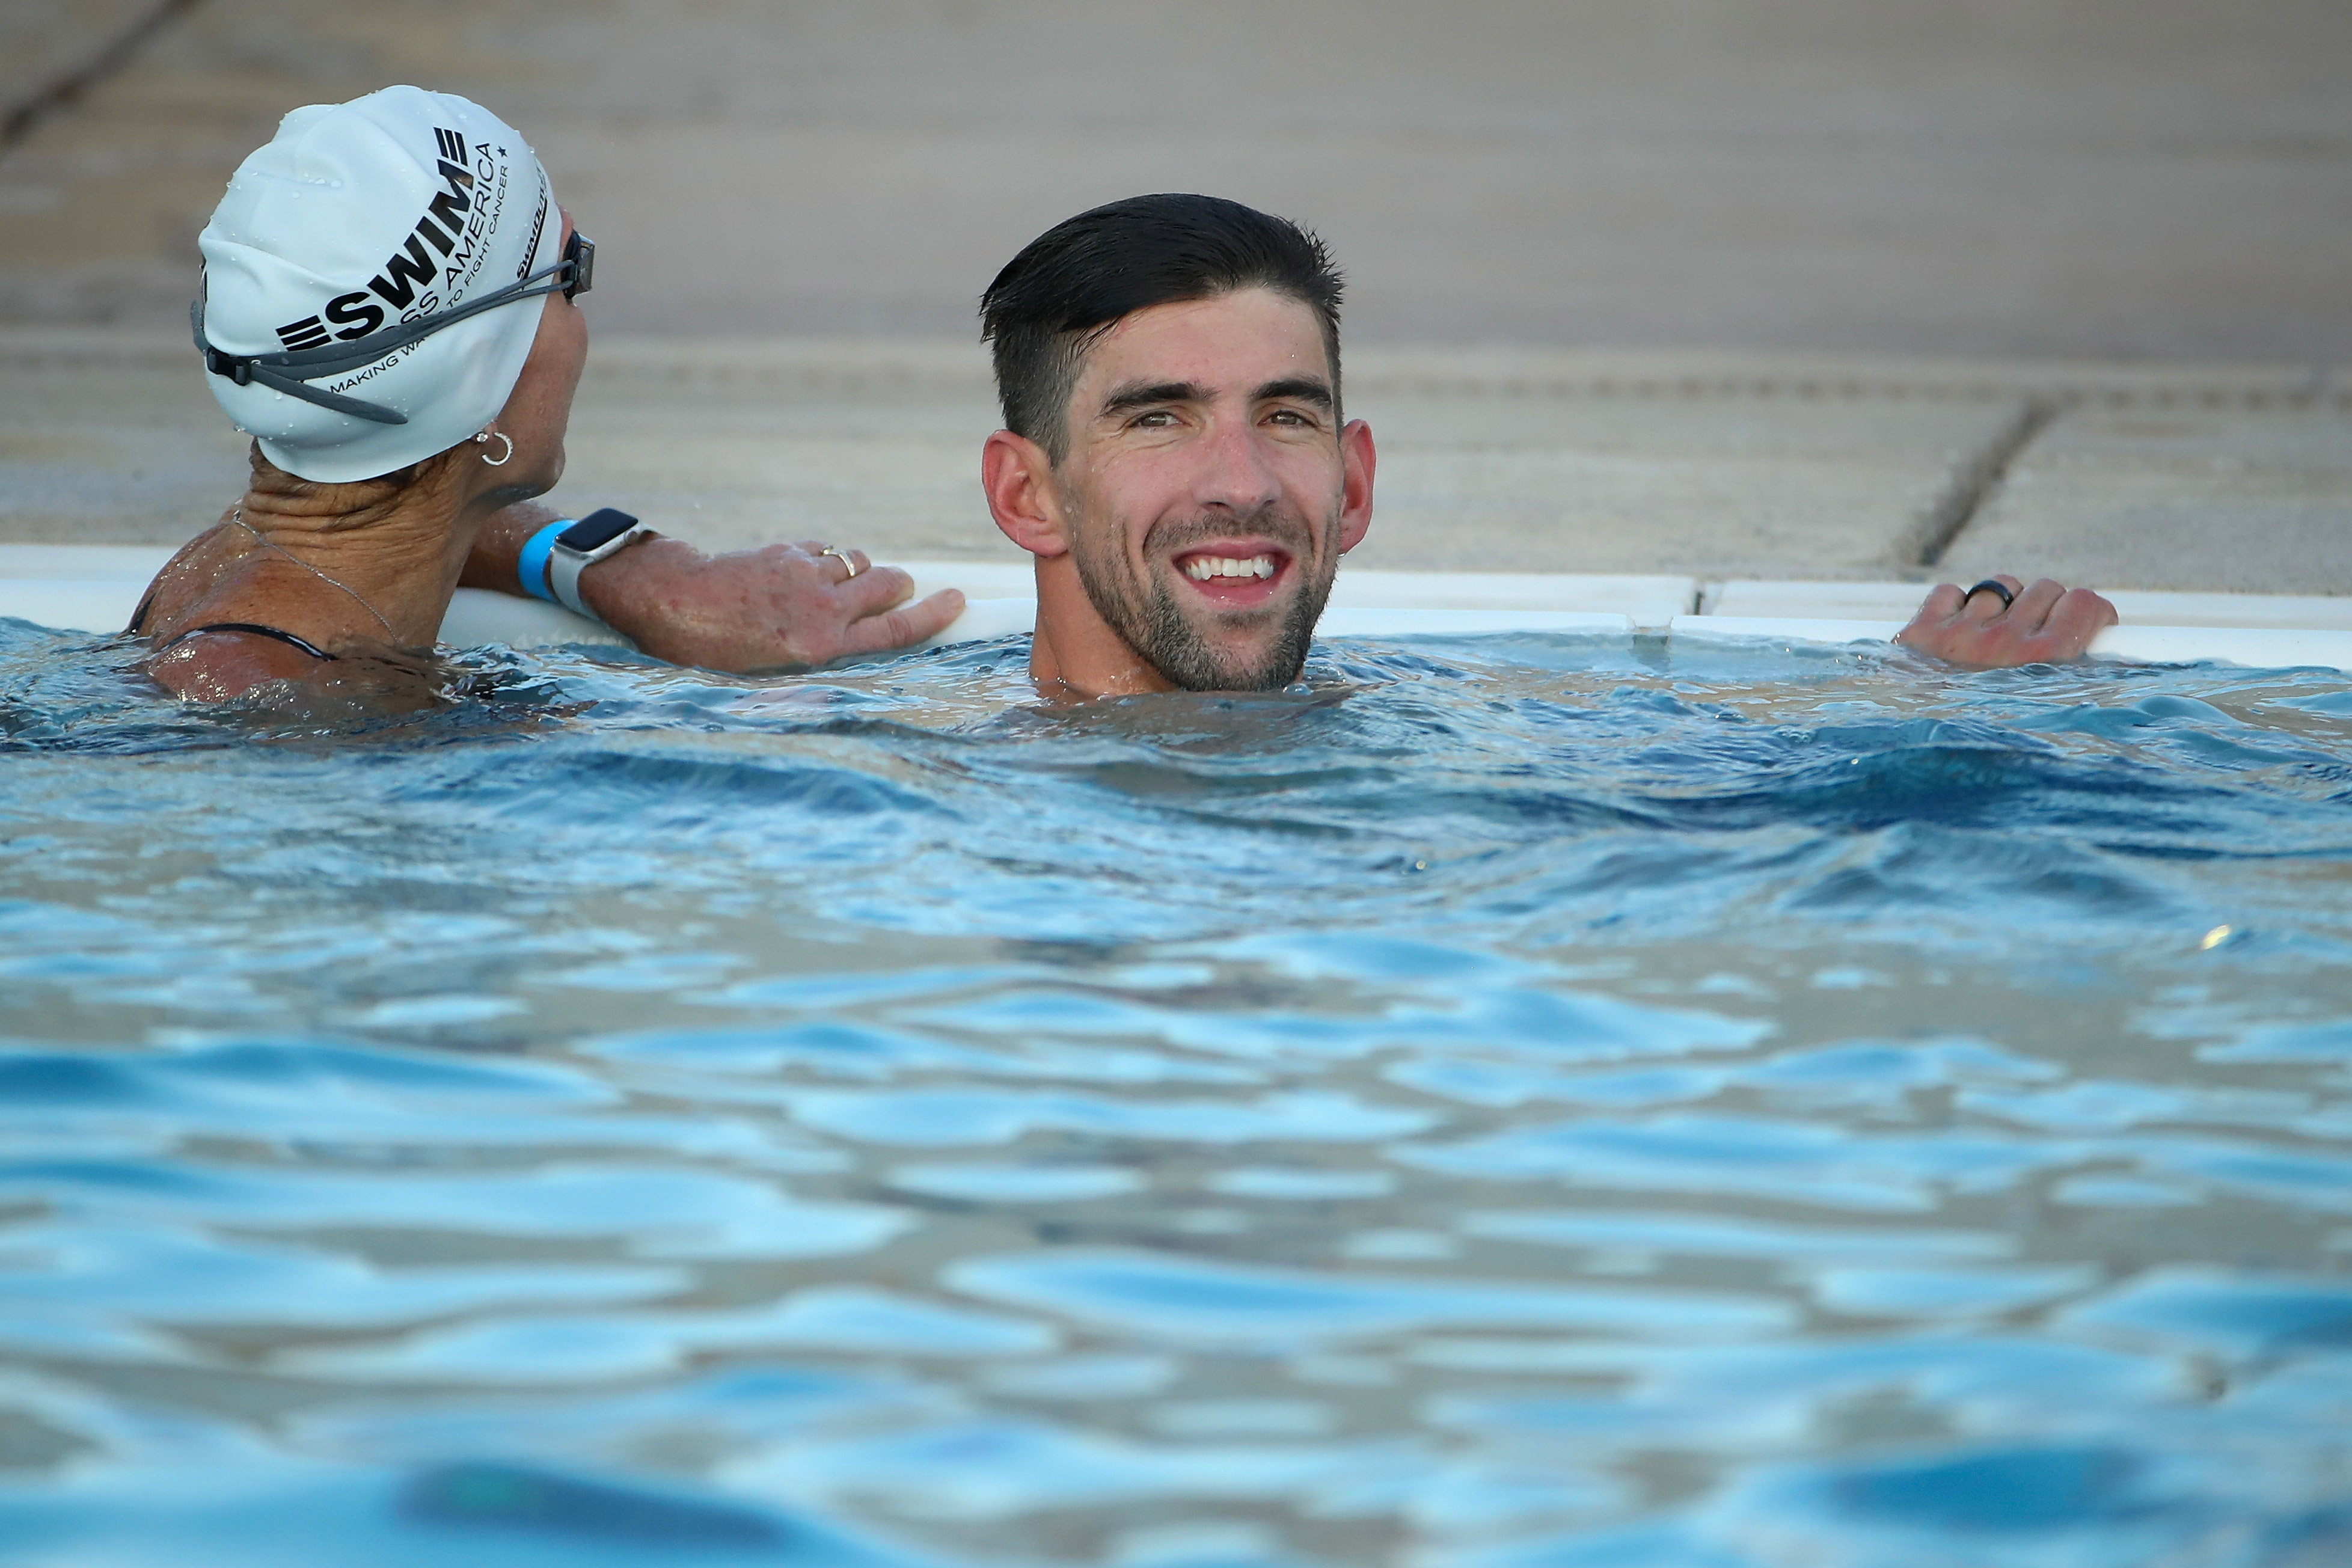 Michael Phelps’ Diet Has Changed Drastically Since Retiring